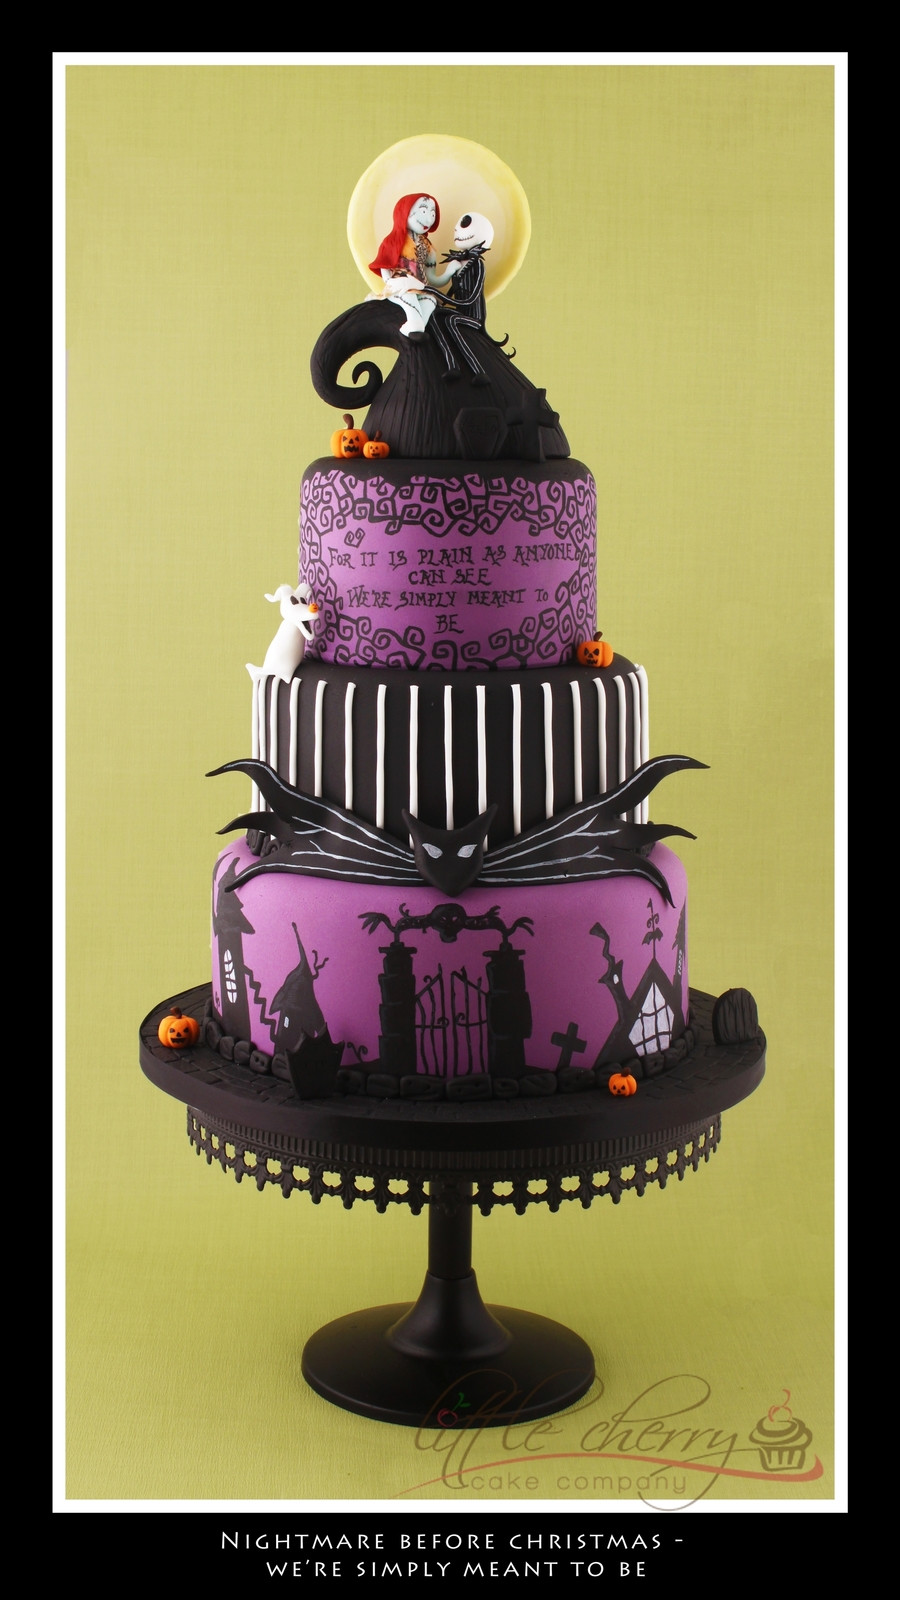 Nightmare Before Christmas Cakes
 Nightmare Before Christmas Wedding Cake CakeCentral